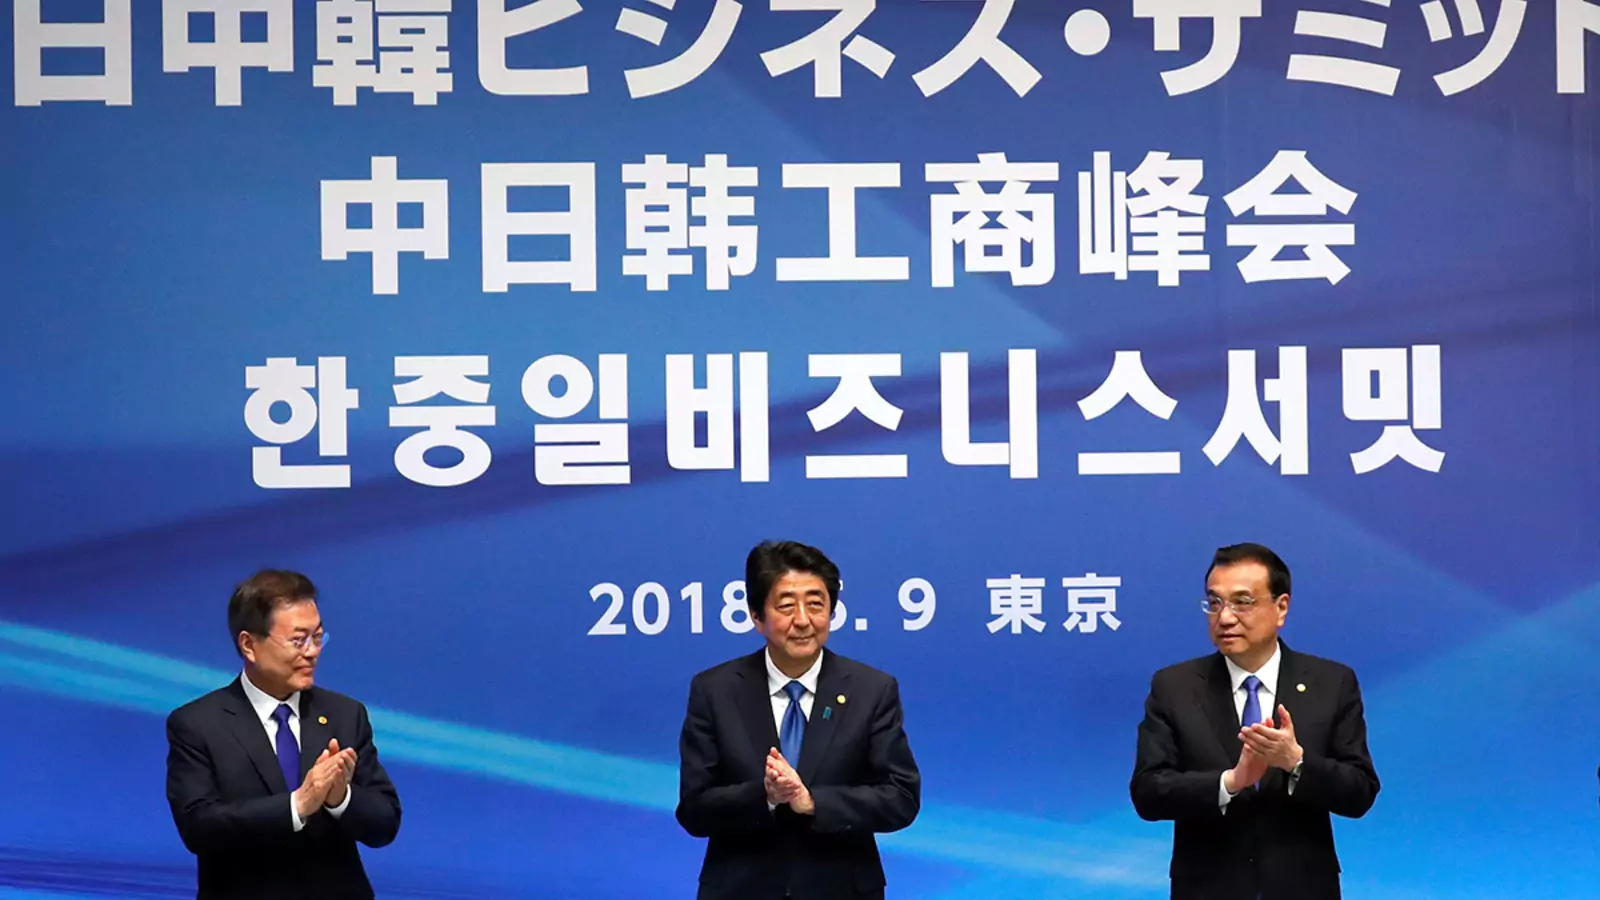 Japanese Prime Minister Shinzo Abe, South Korean President Moon Jae-in, and Chinese Premier Li Keqiang attend a business summit in Tokyo on May 9, 2018.